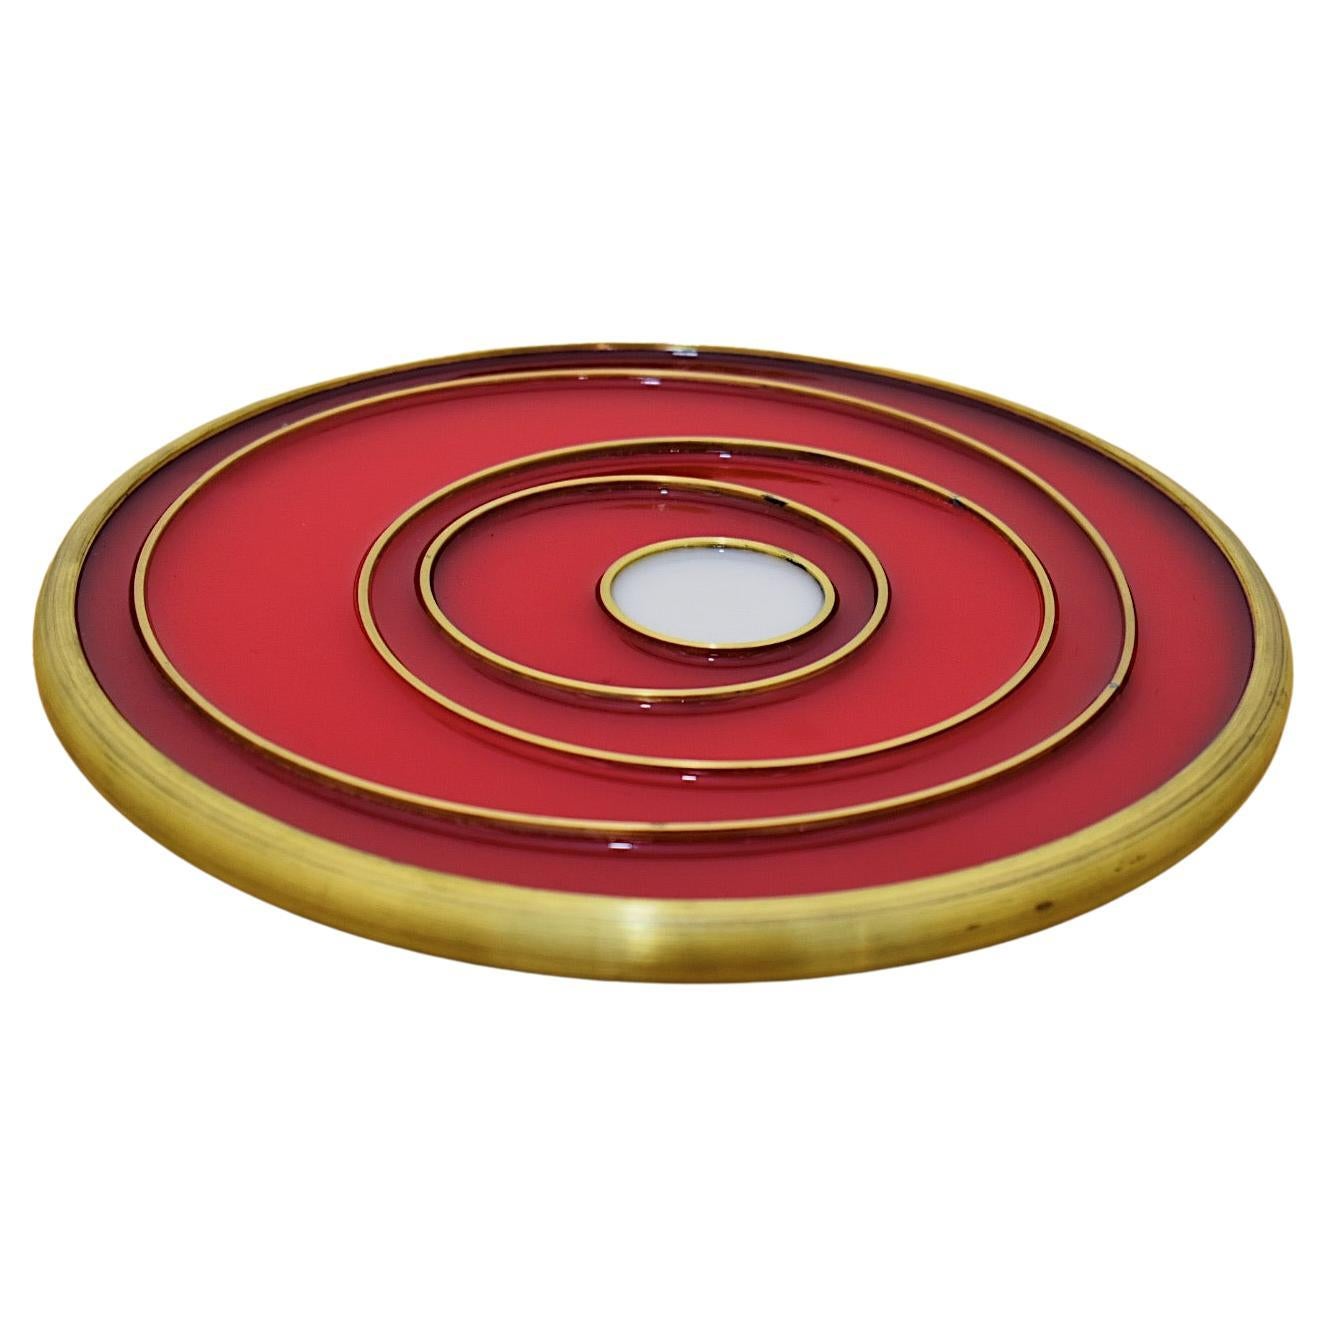 8" Brass Spun Trivet with Color Pop of Red and White by Daughter Mfg For Sale